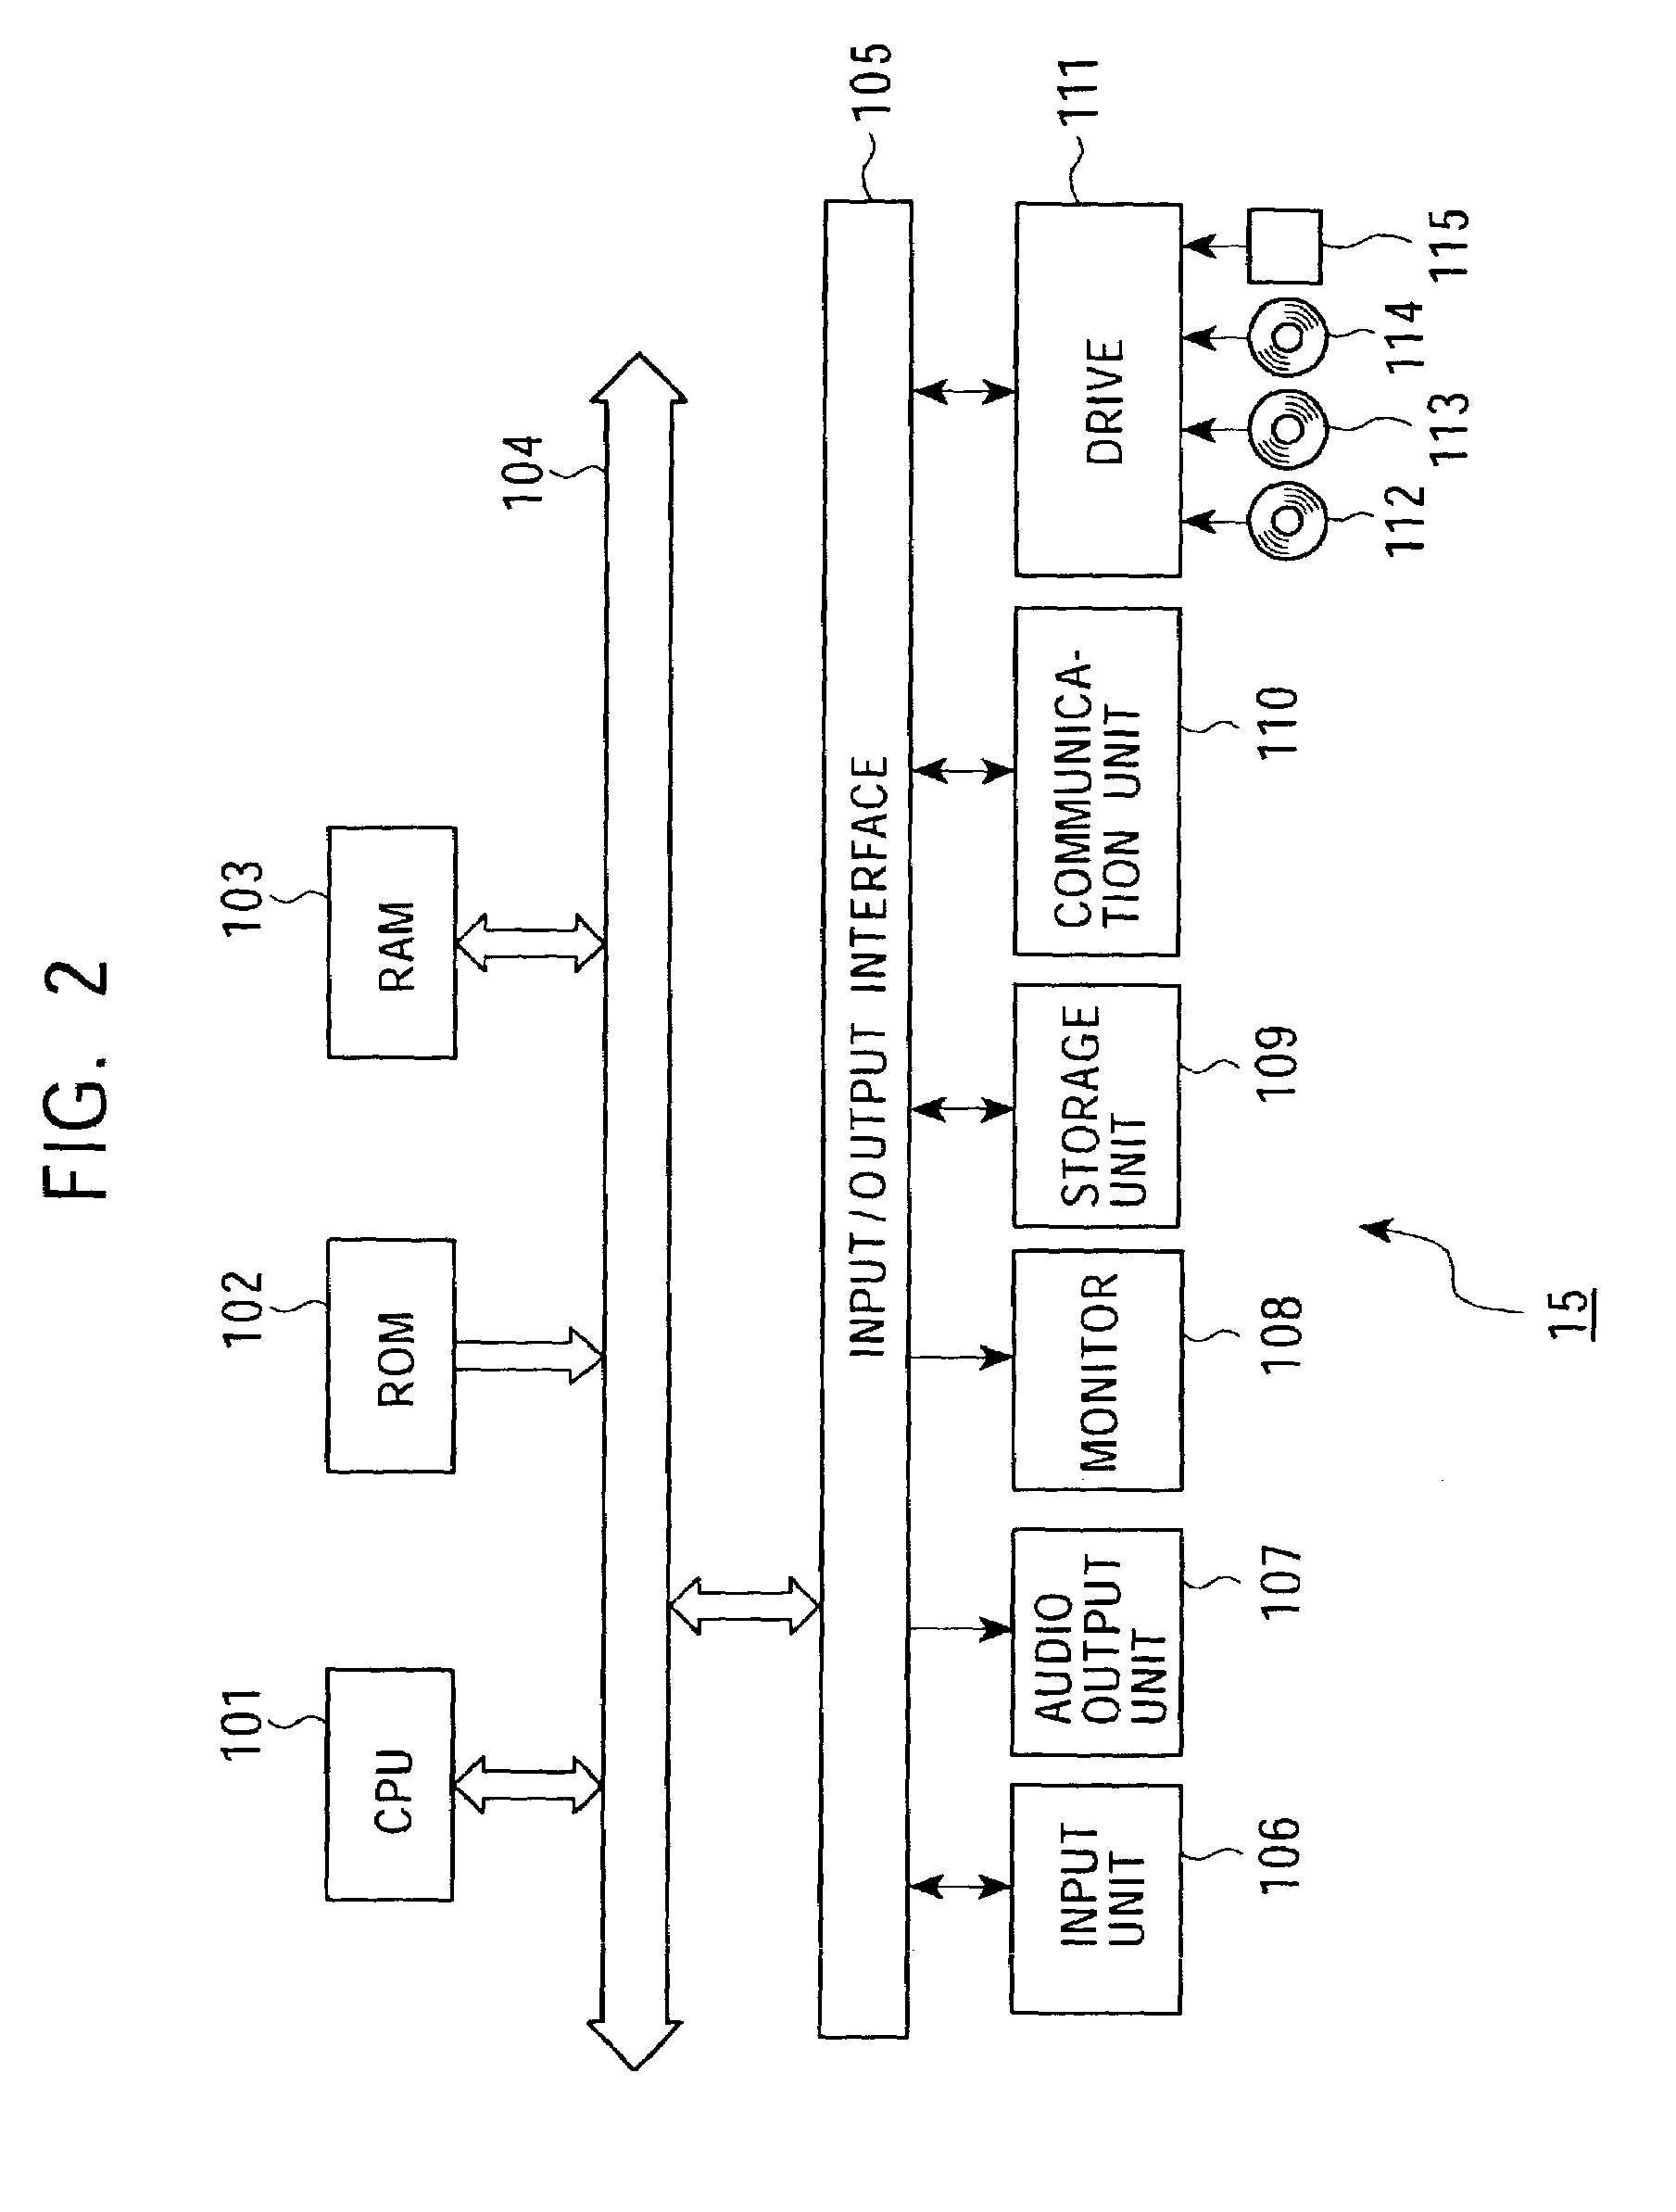 Chat system displaying a link arrow directed from a hyperlink to content of an associated attachment file